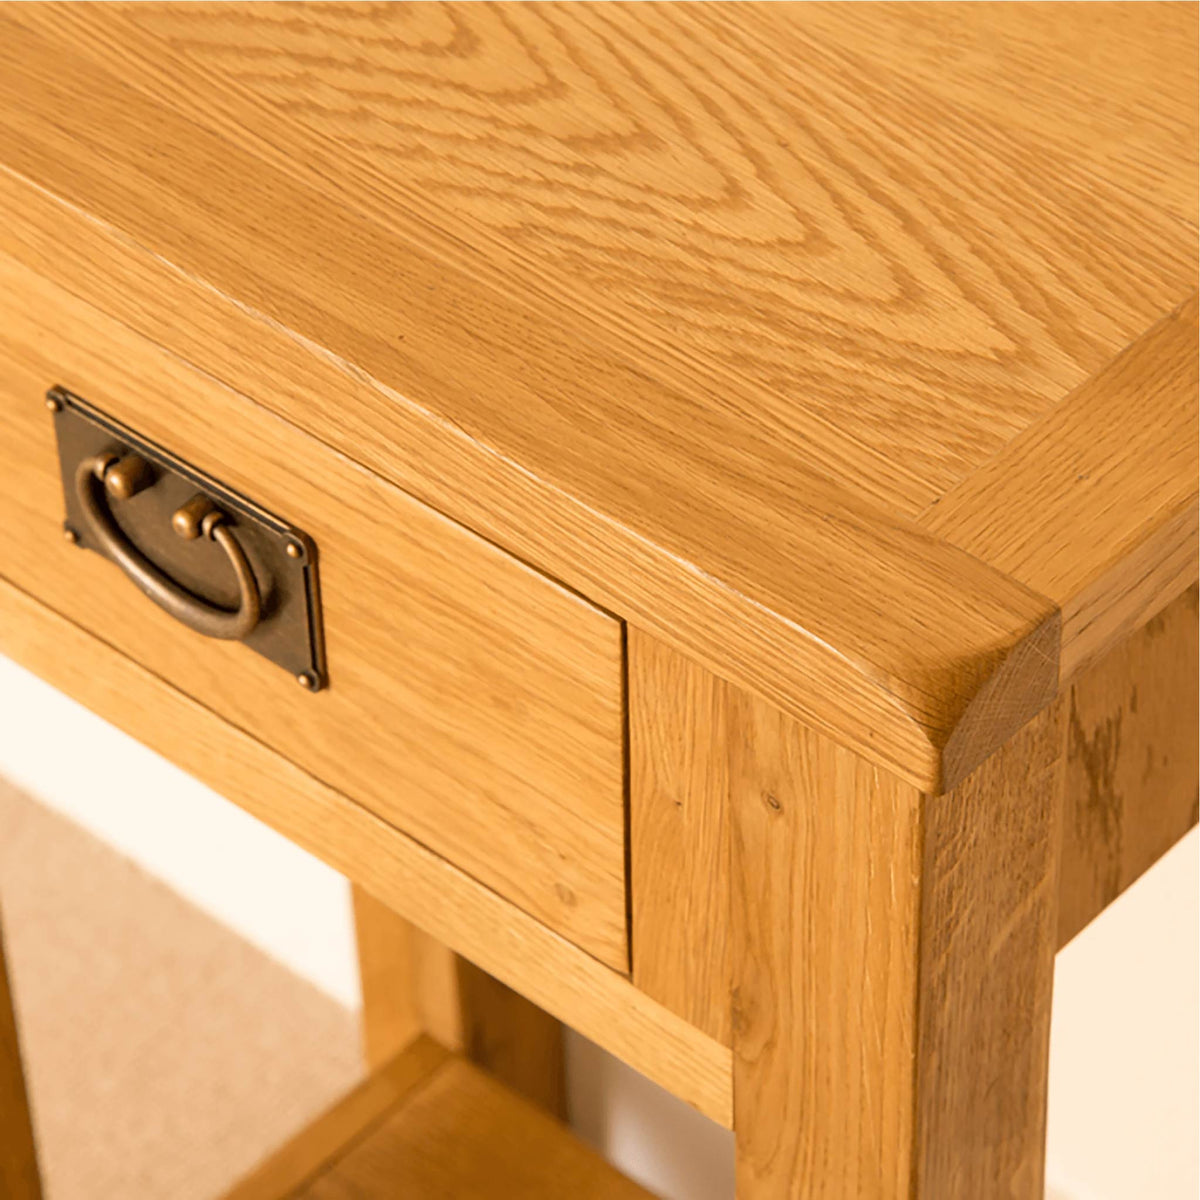 Lanner Oak Telephone Table drawer close up view